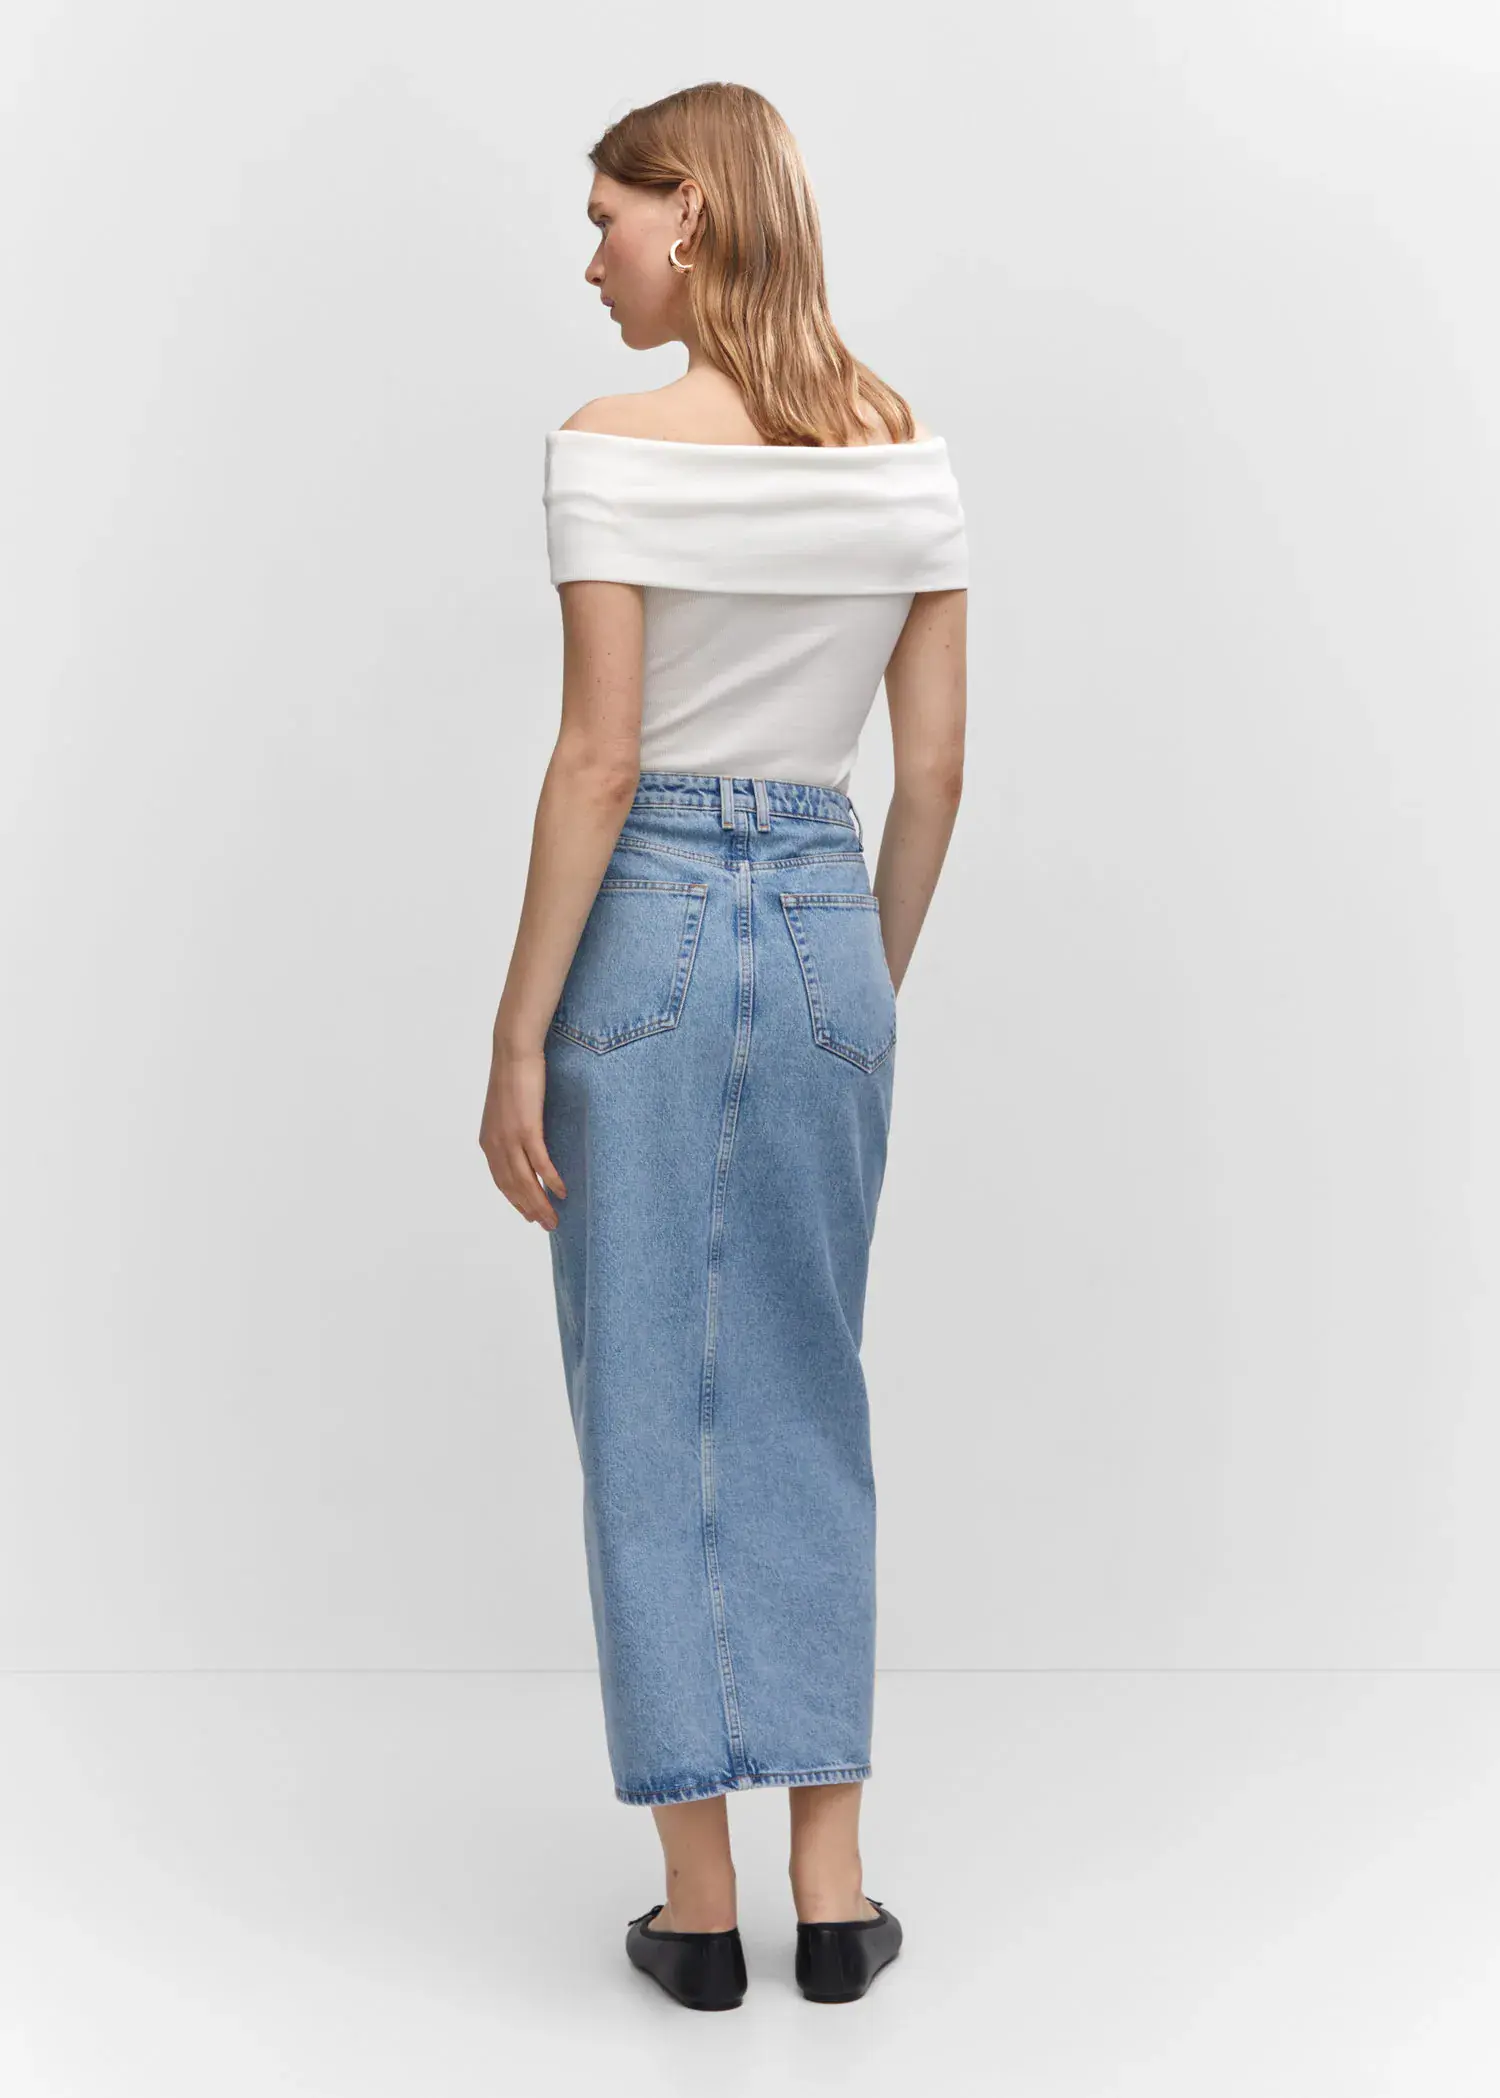 Mango Slit denim skirt. a woman in a white top and light blue jeans. 